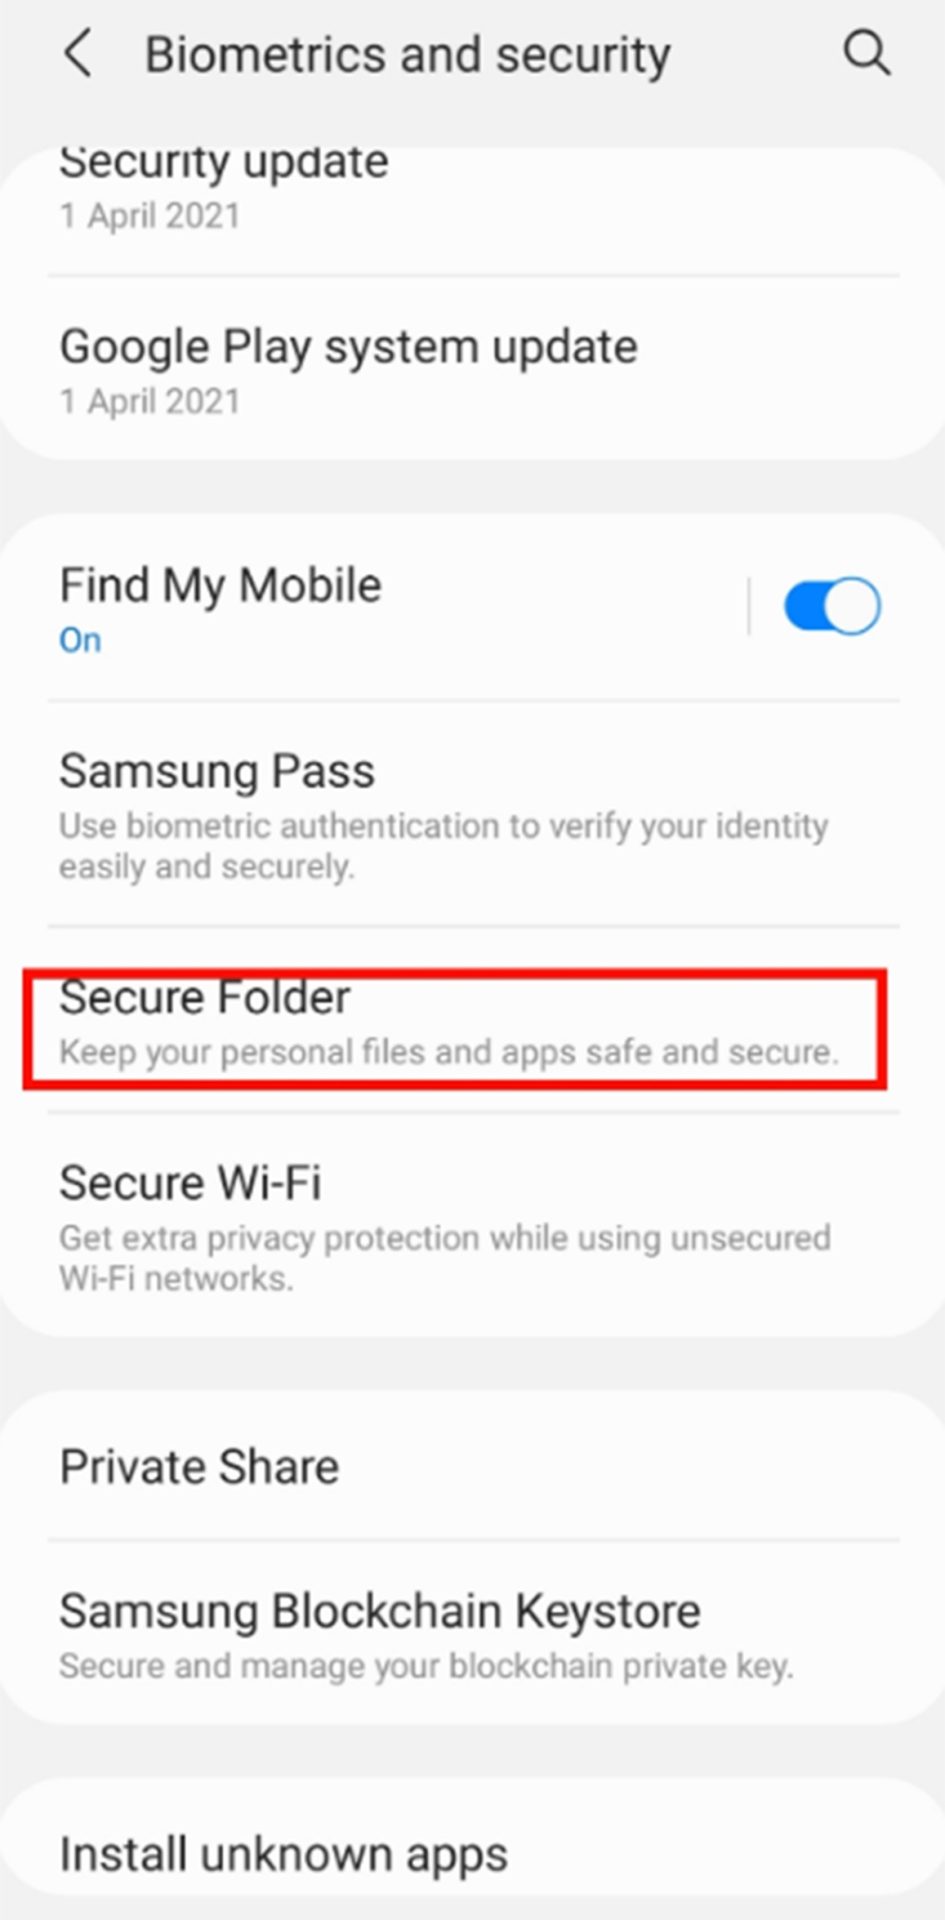 Samsung settings menu/around the secure folder option is crossed out